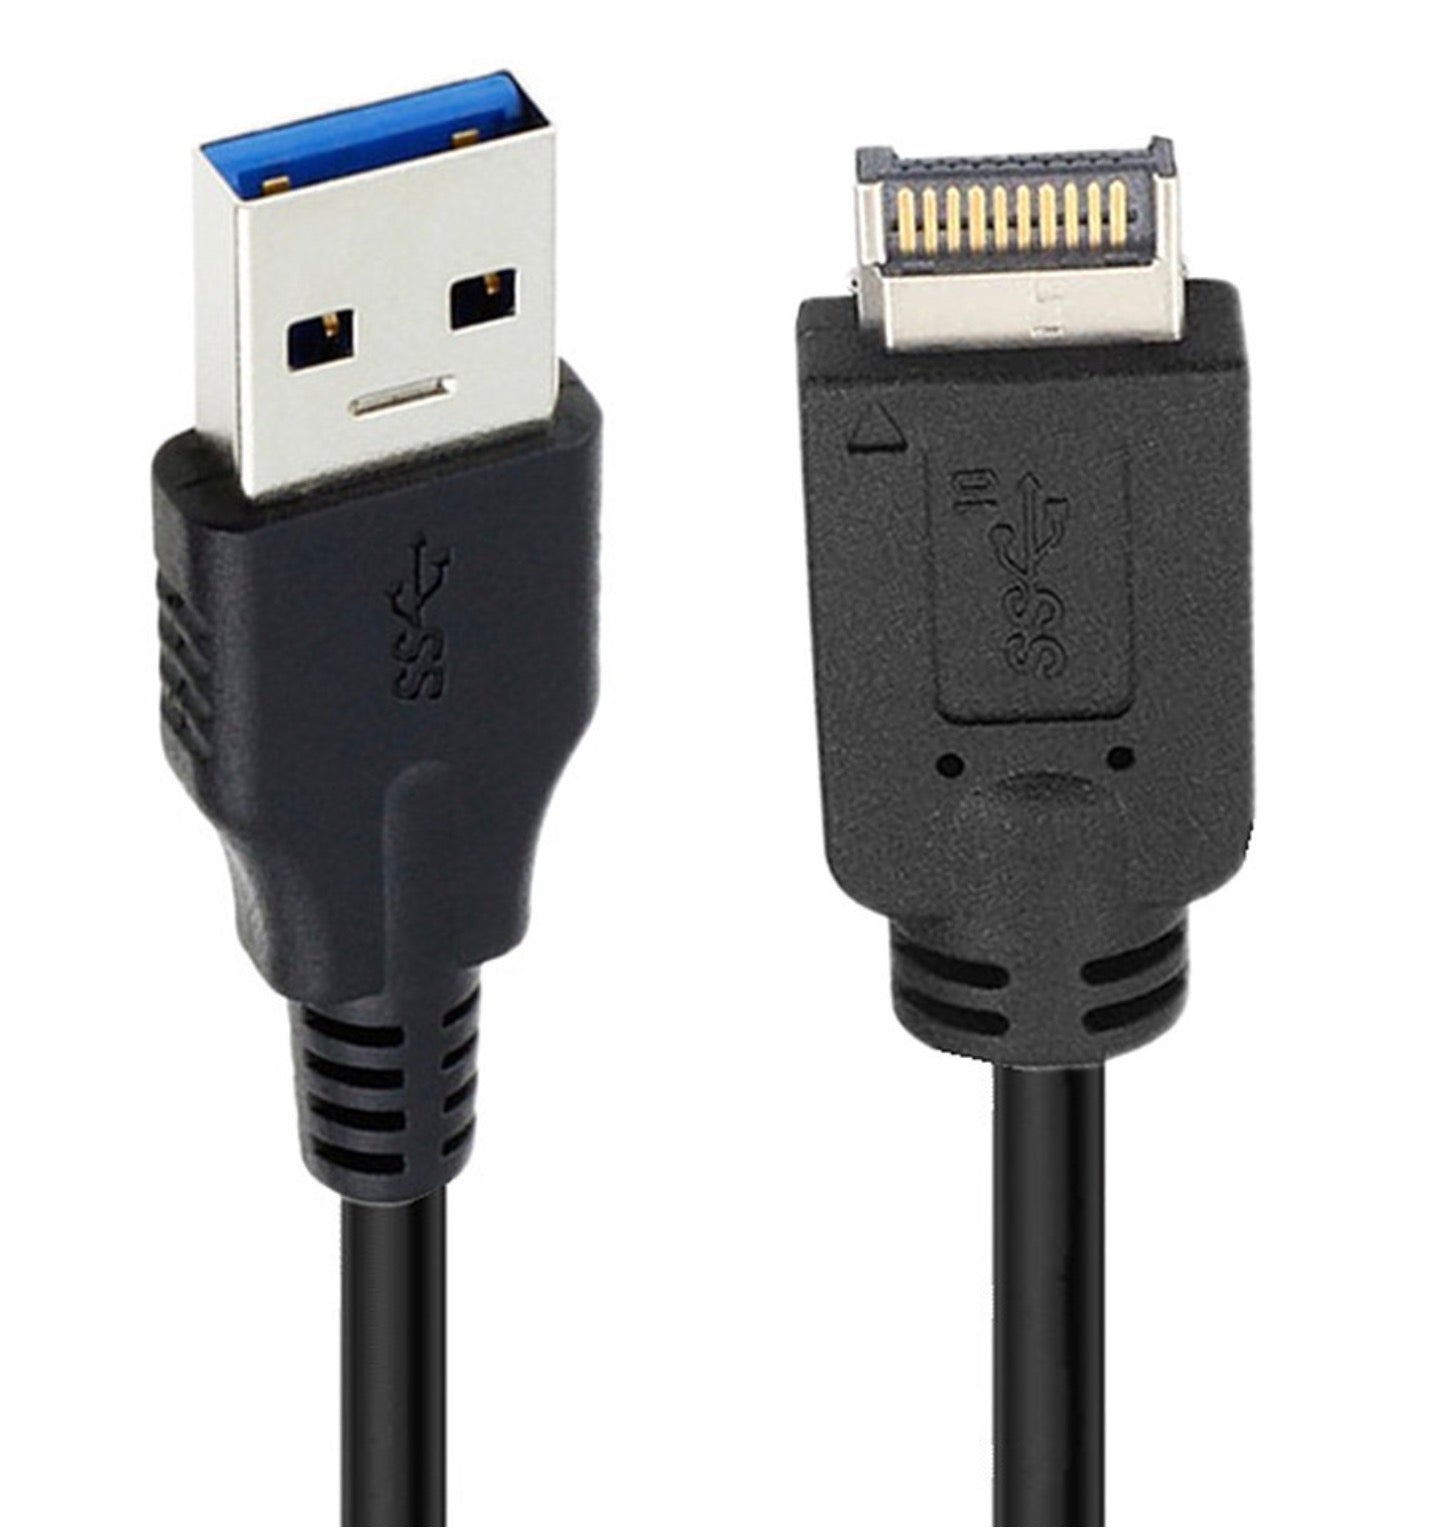 USB 3.1 Type E 24-pin Front Panel Header to USB 3.0 Type-A Male Extension Cable 0.5m